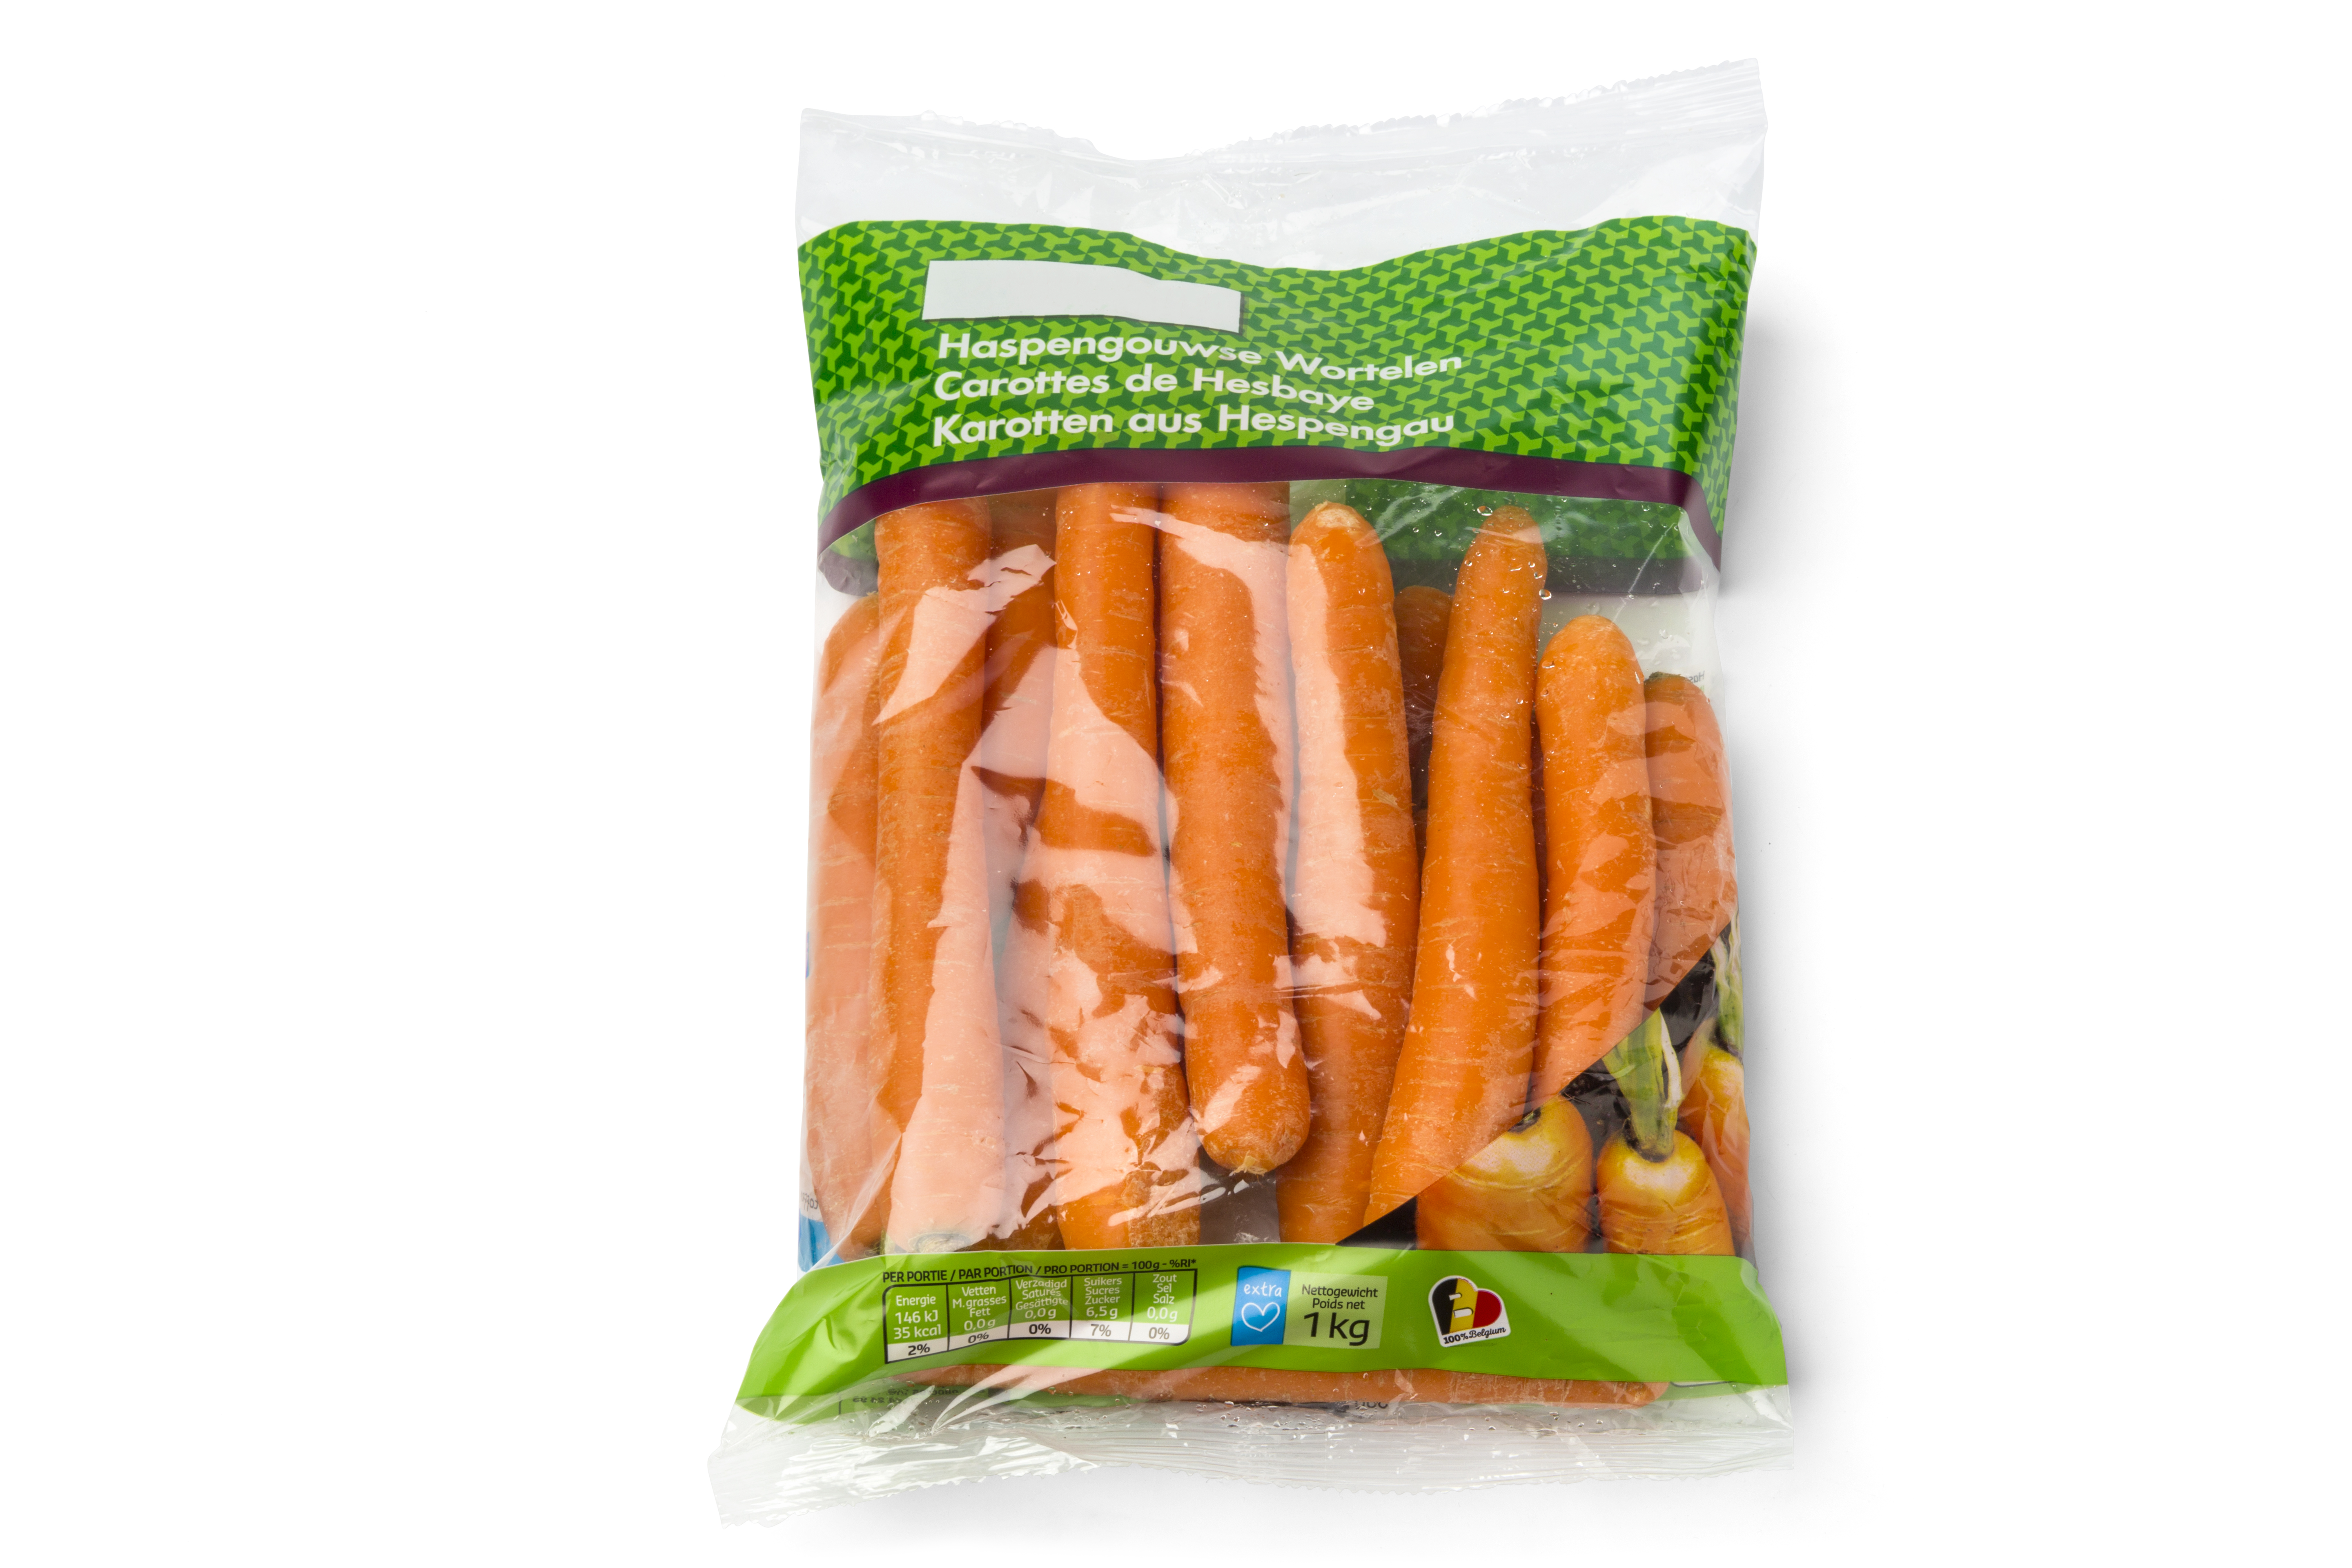 How to Store Carrots - Best Ways to Keep Carrots Fresh & Last Longer